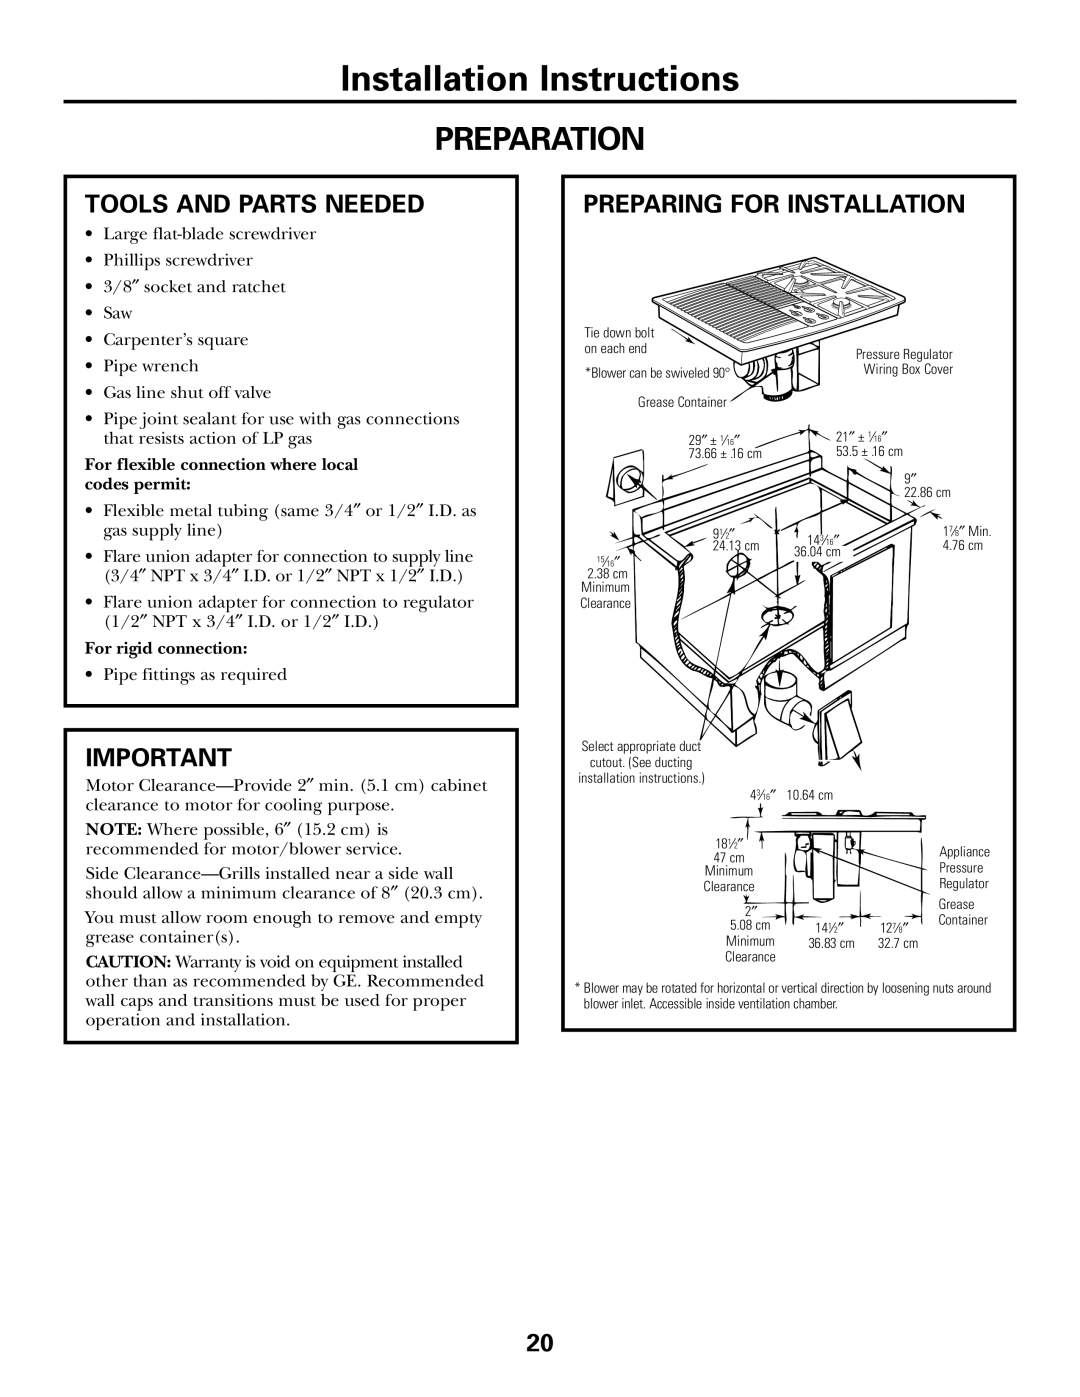 GE JGP990 Preparation, Installation Instructions, Tools And Parts Needed, Preparing For Installation, For rigid connection 